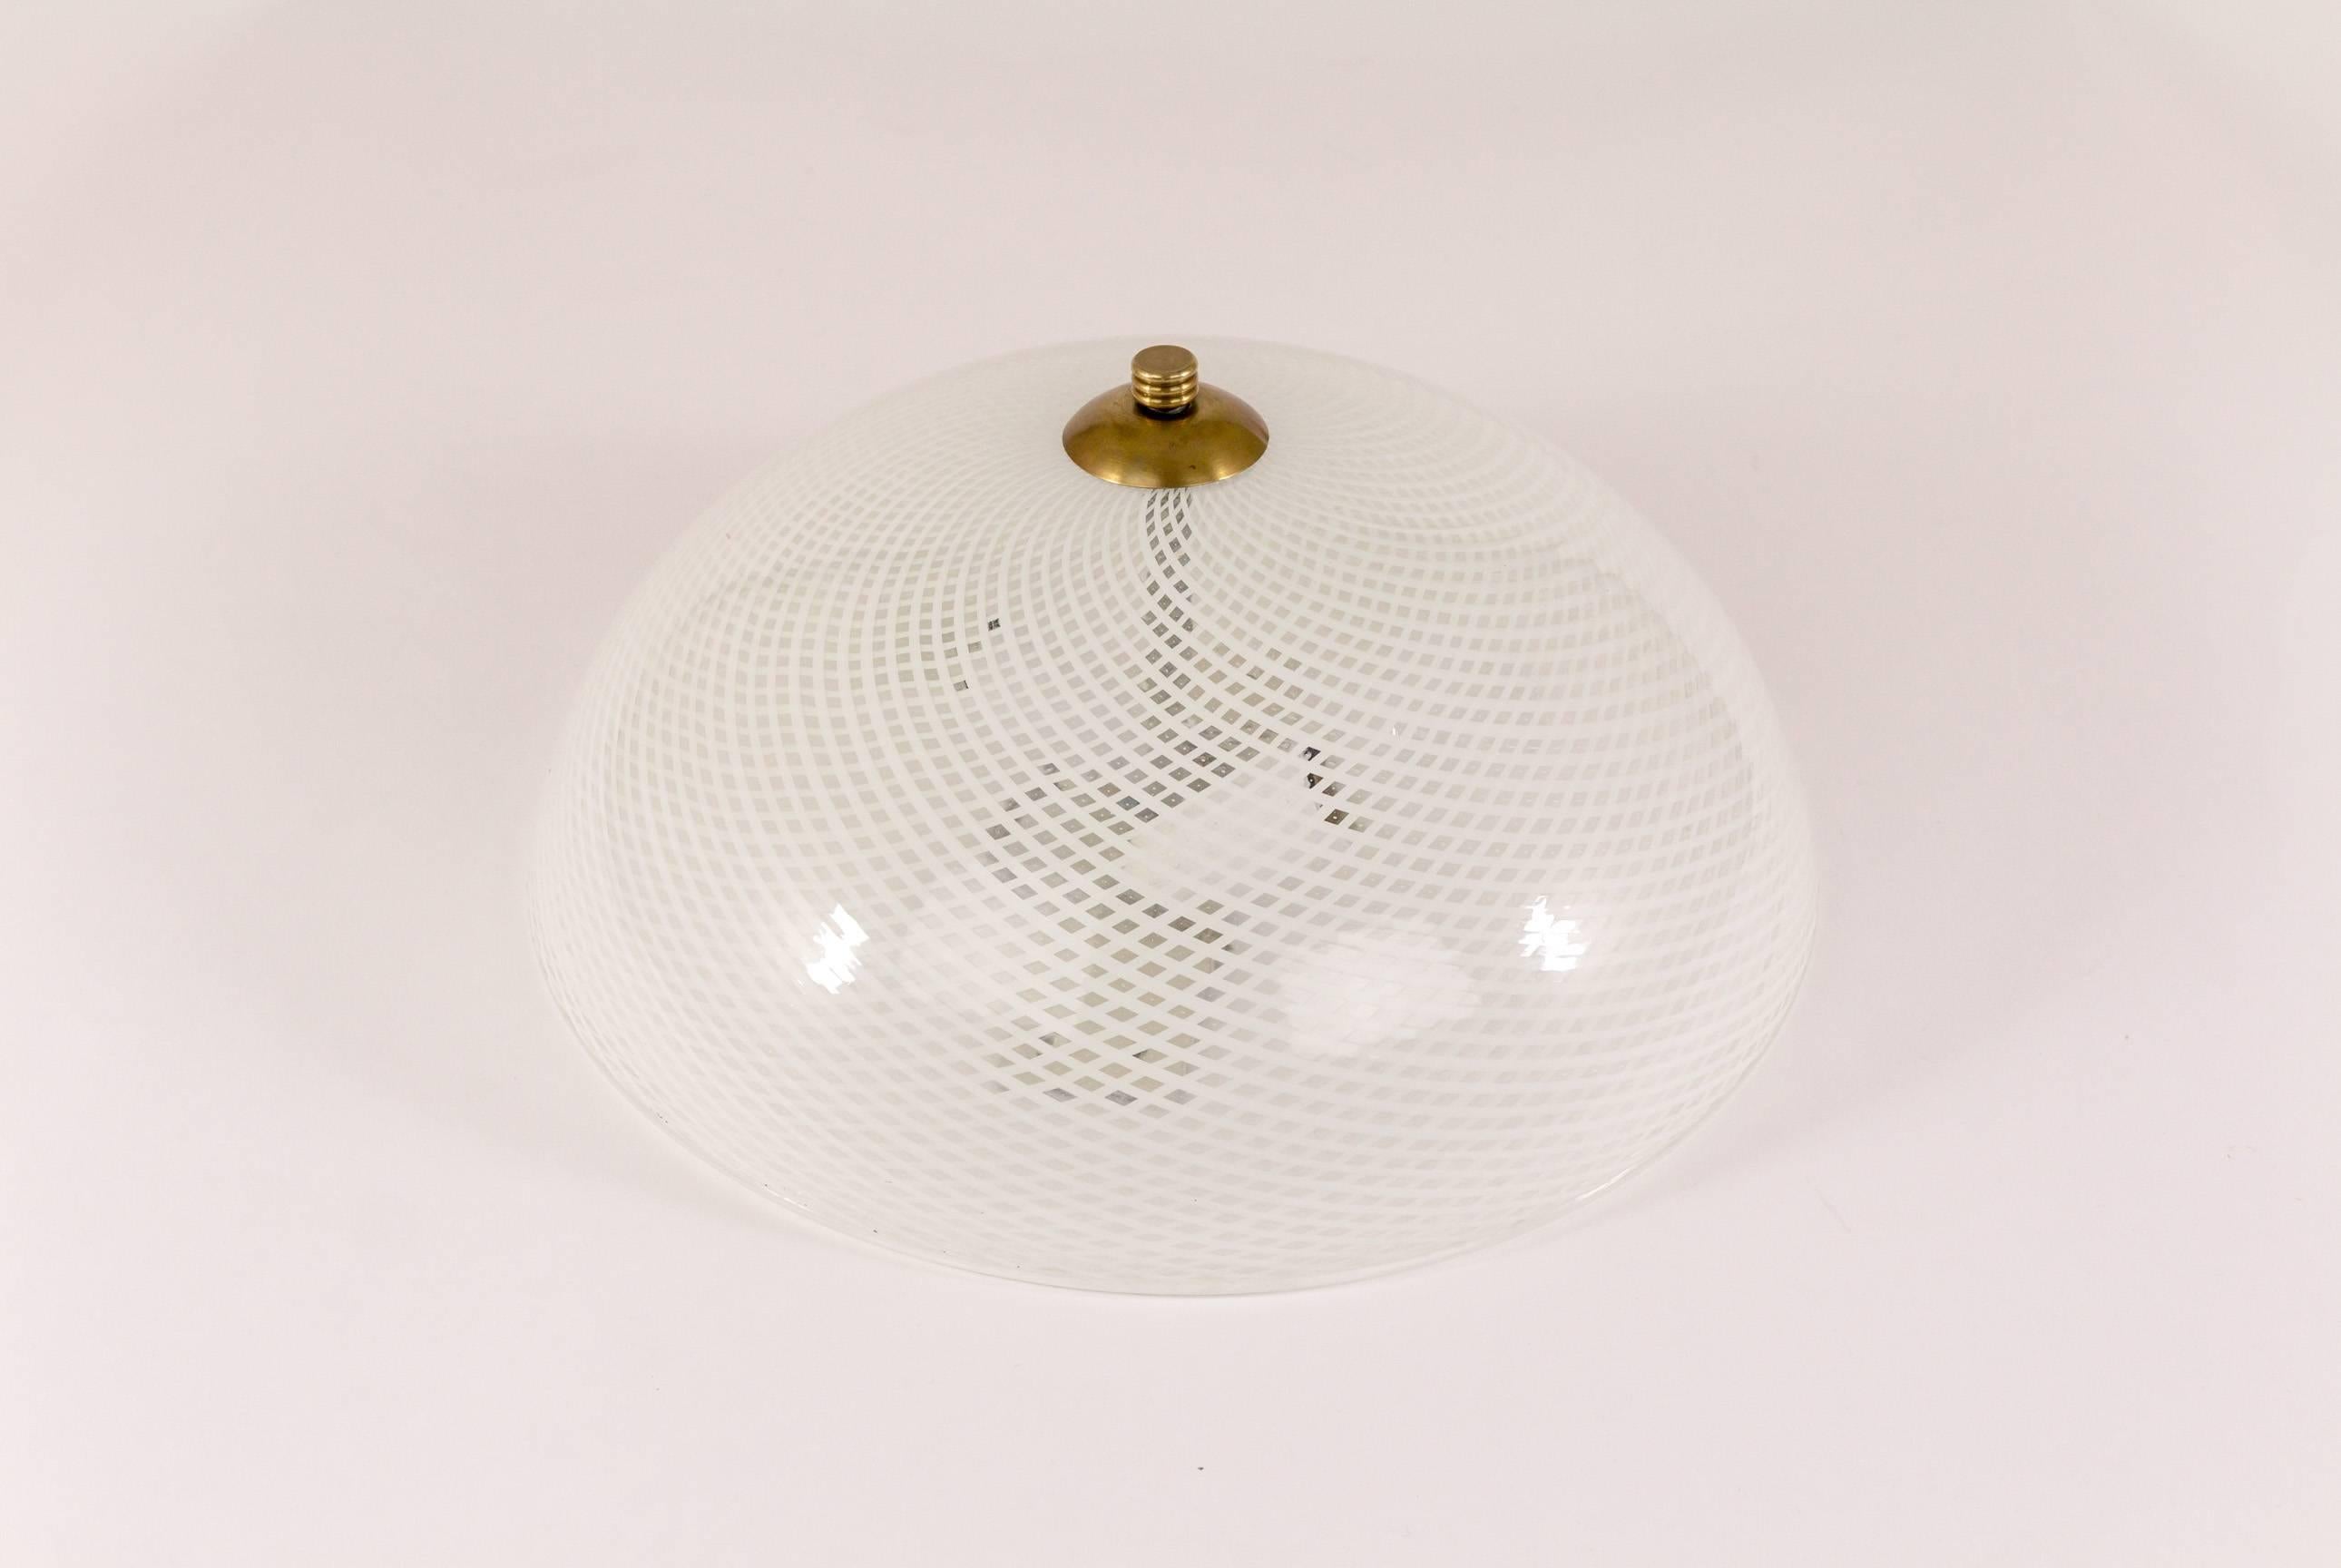 A pair of elegant round ceiling lights with reticello glass by Venini, with brass mounts. Reticello which translates into 